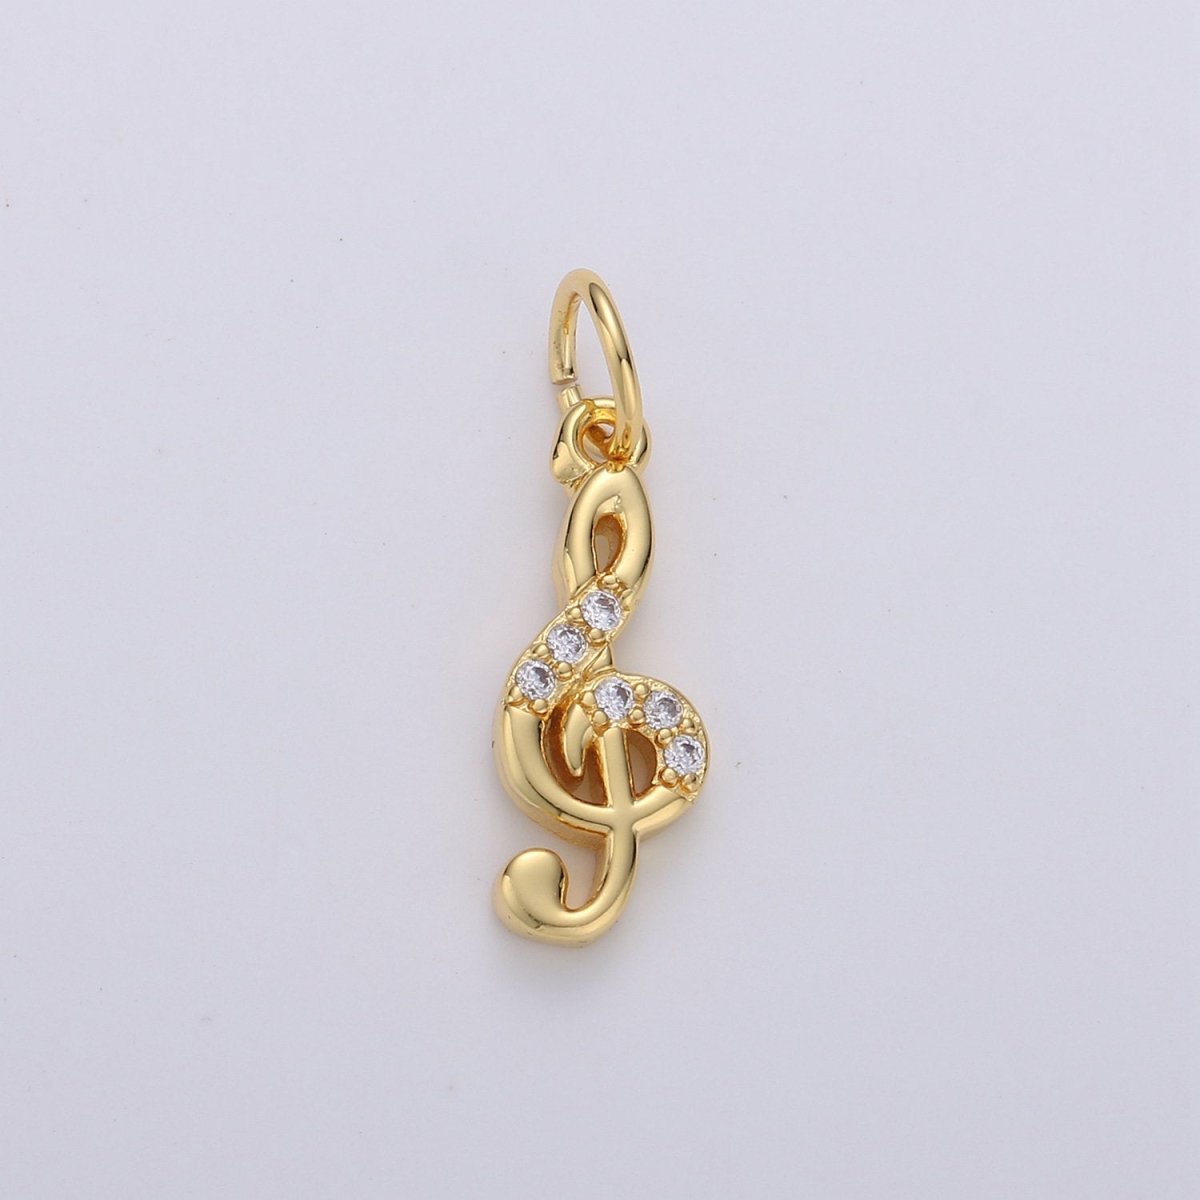 Treble Clef Charms Musical Note Charm Music Pendant Gold Filled Charm Musician Jewelry for Bracelet Necklace Earring Charm D-291 D-292 - DLUXCA